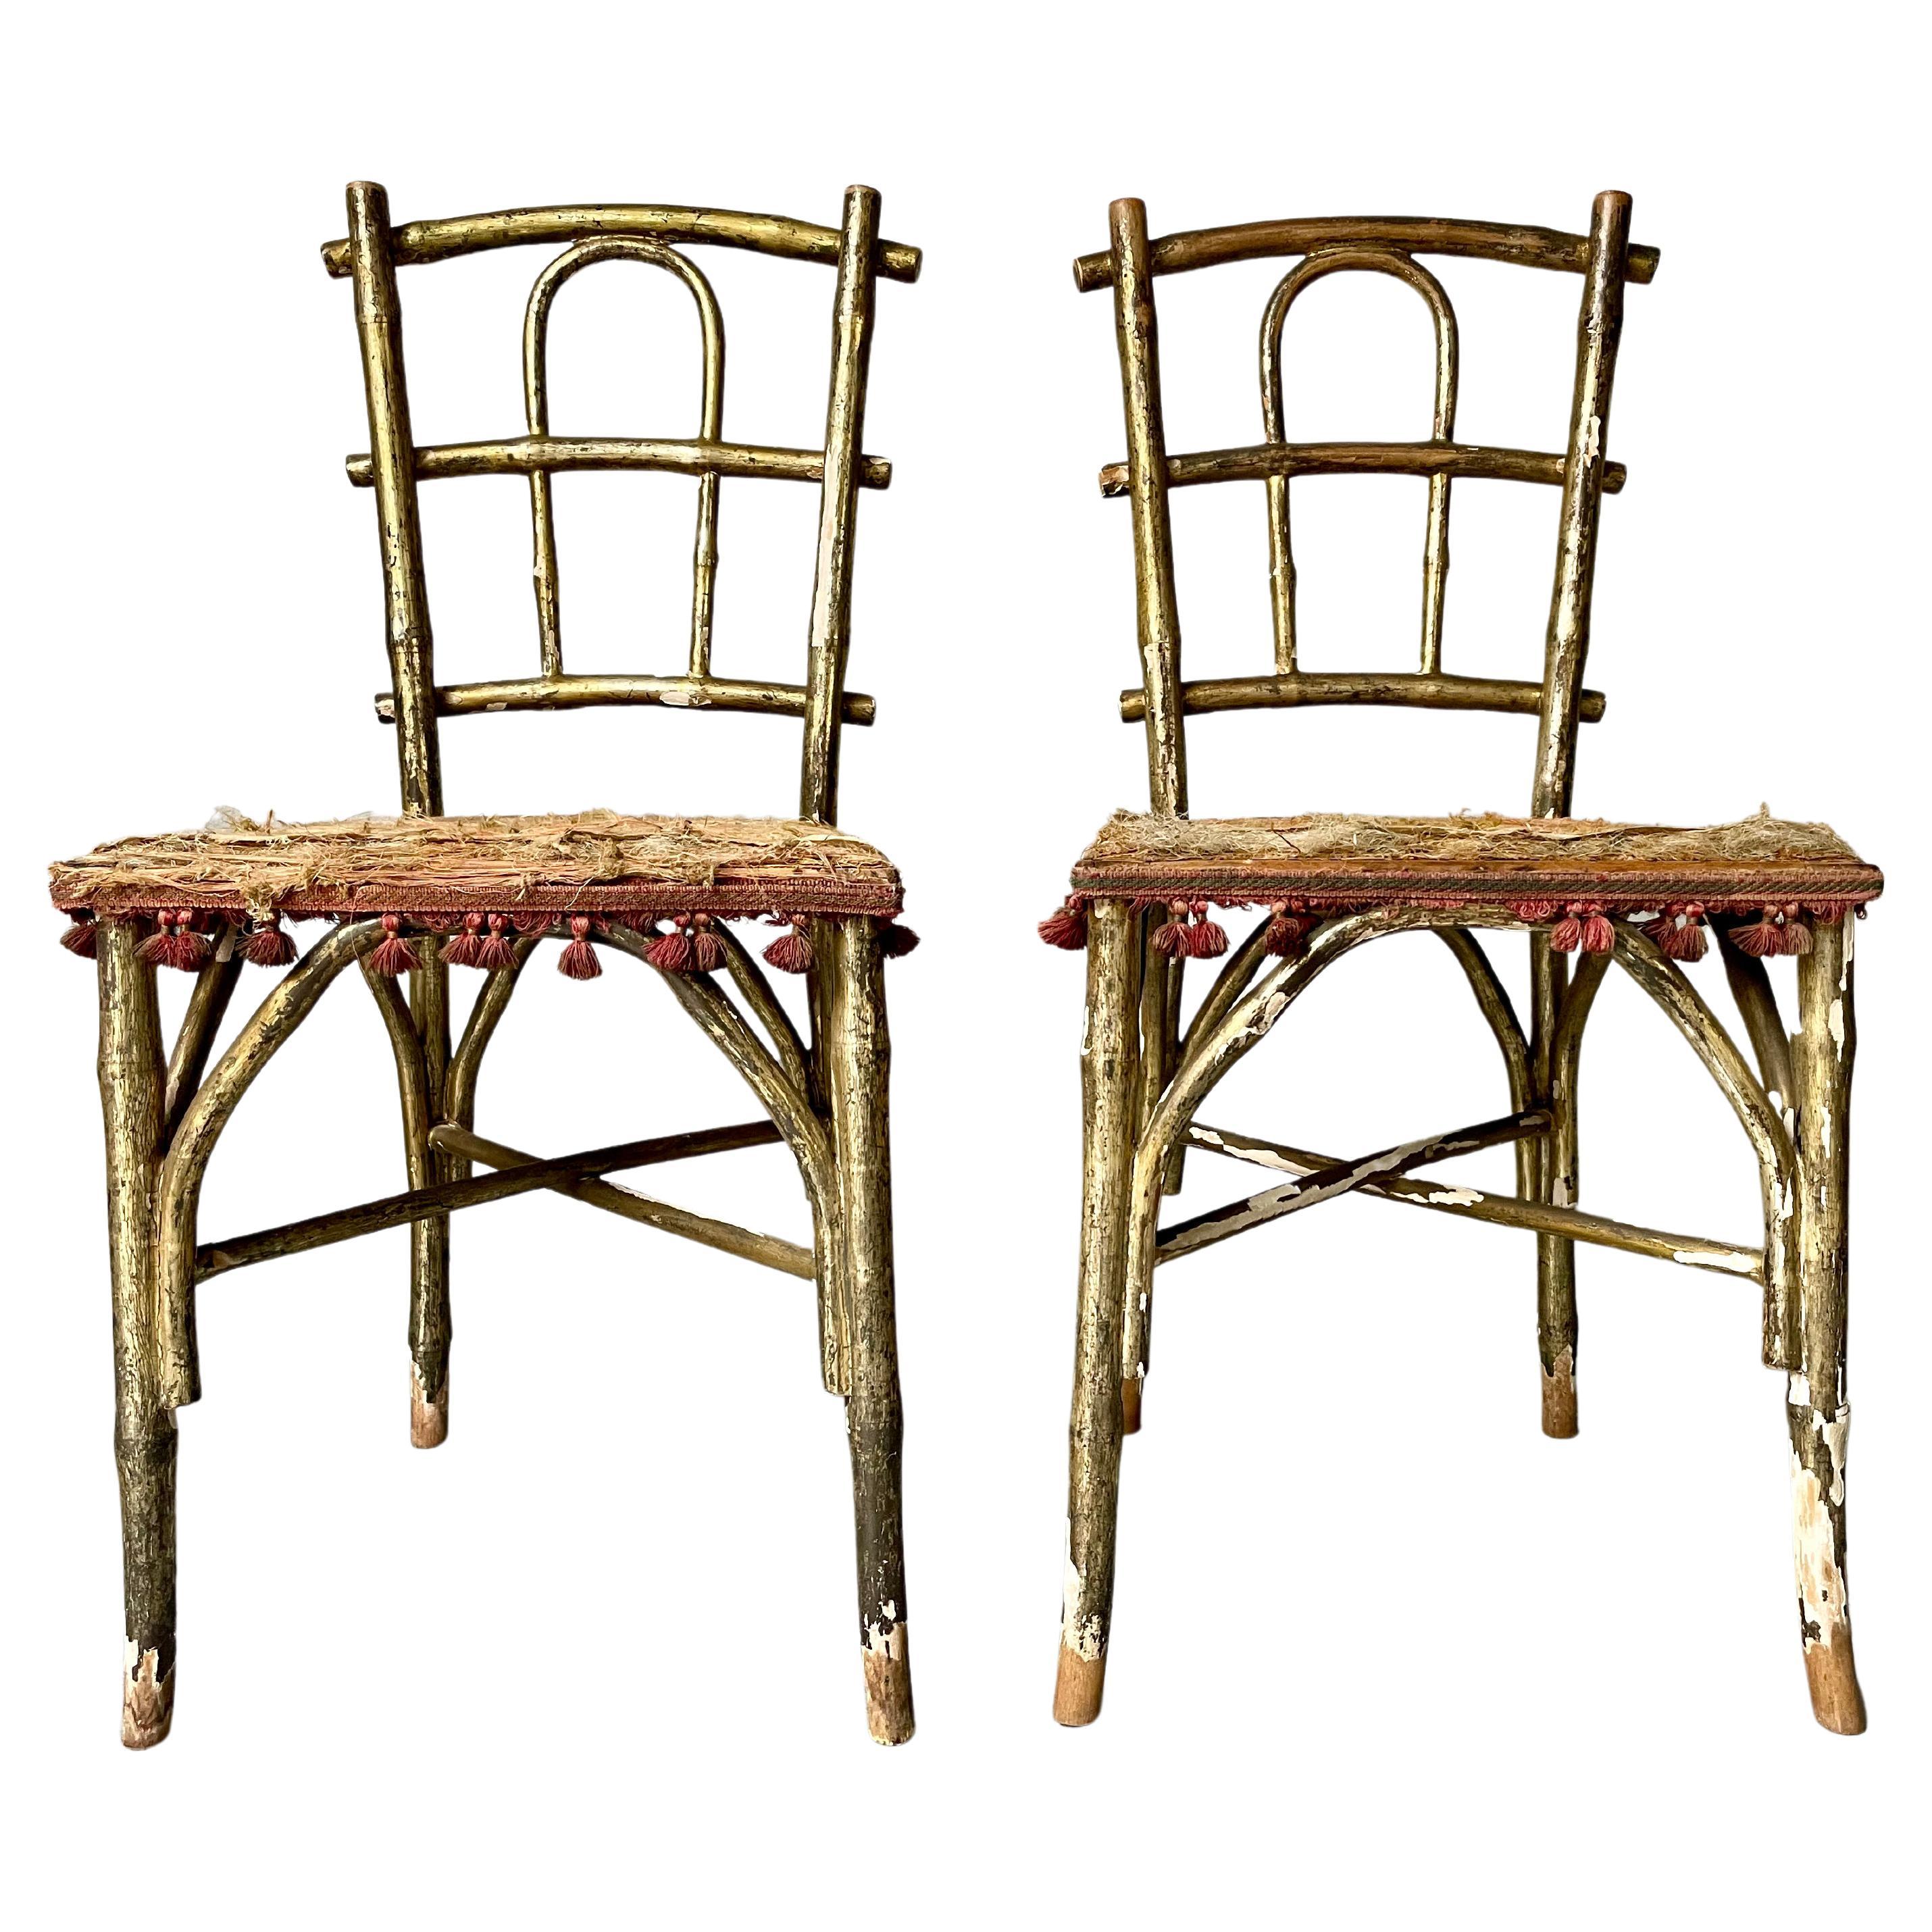 Pair of 19th century Faux Bamboo Parlor Chairs by Thonet